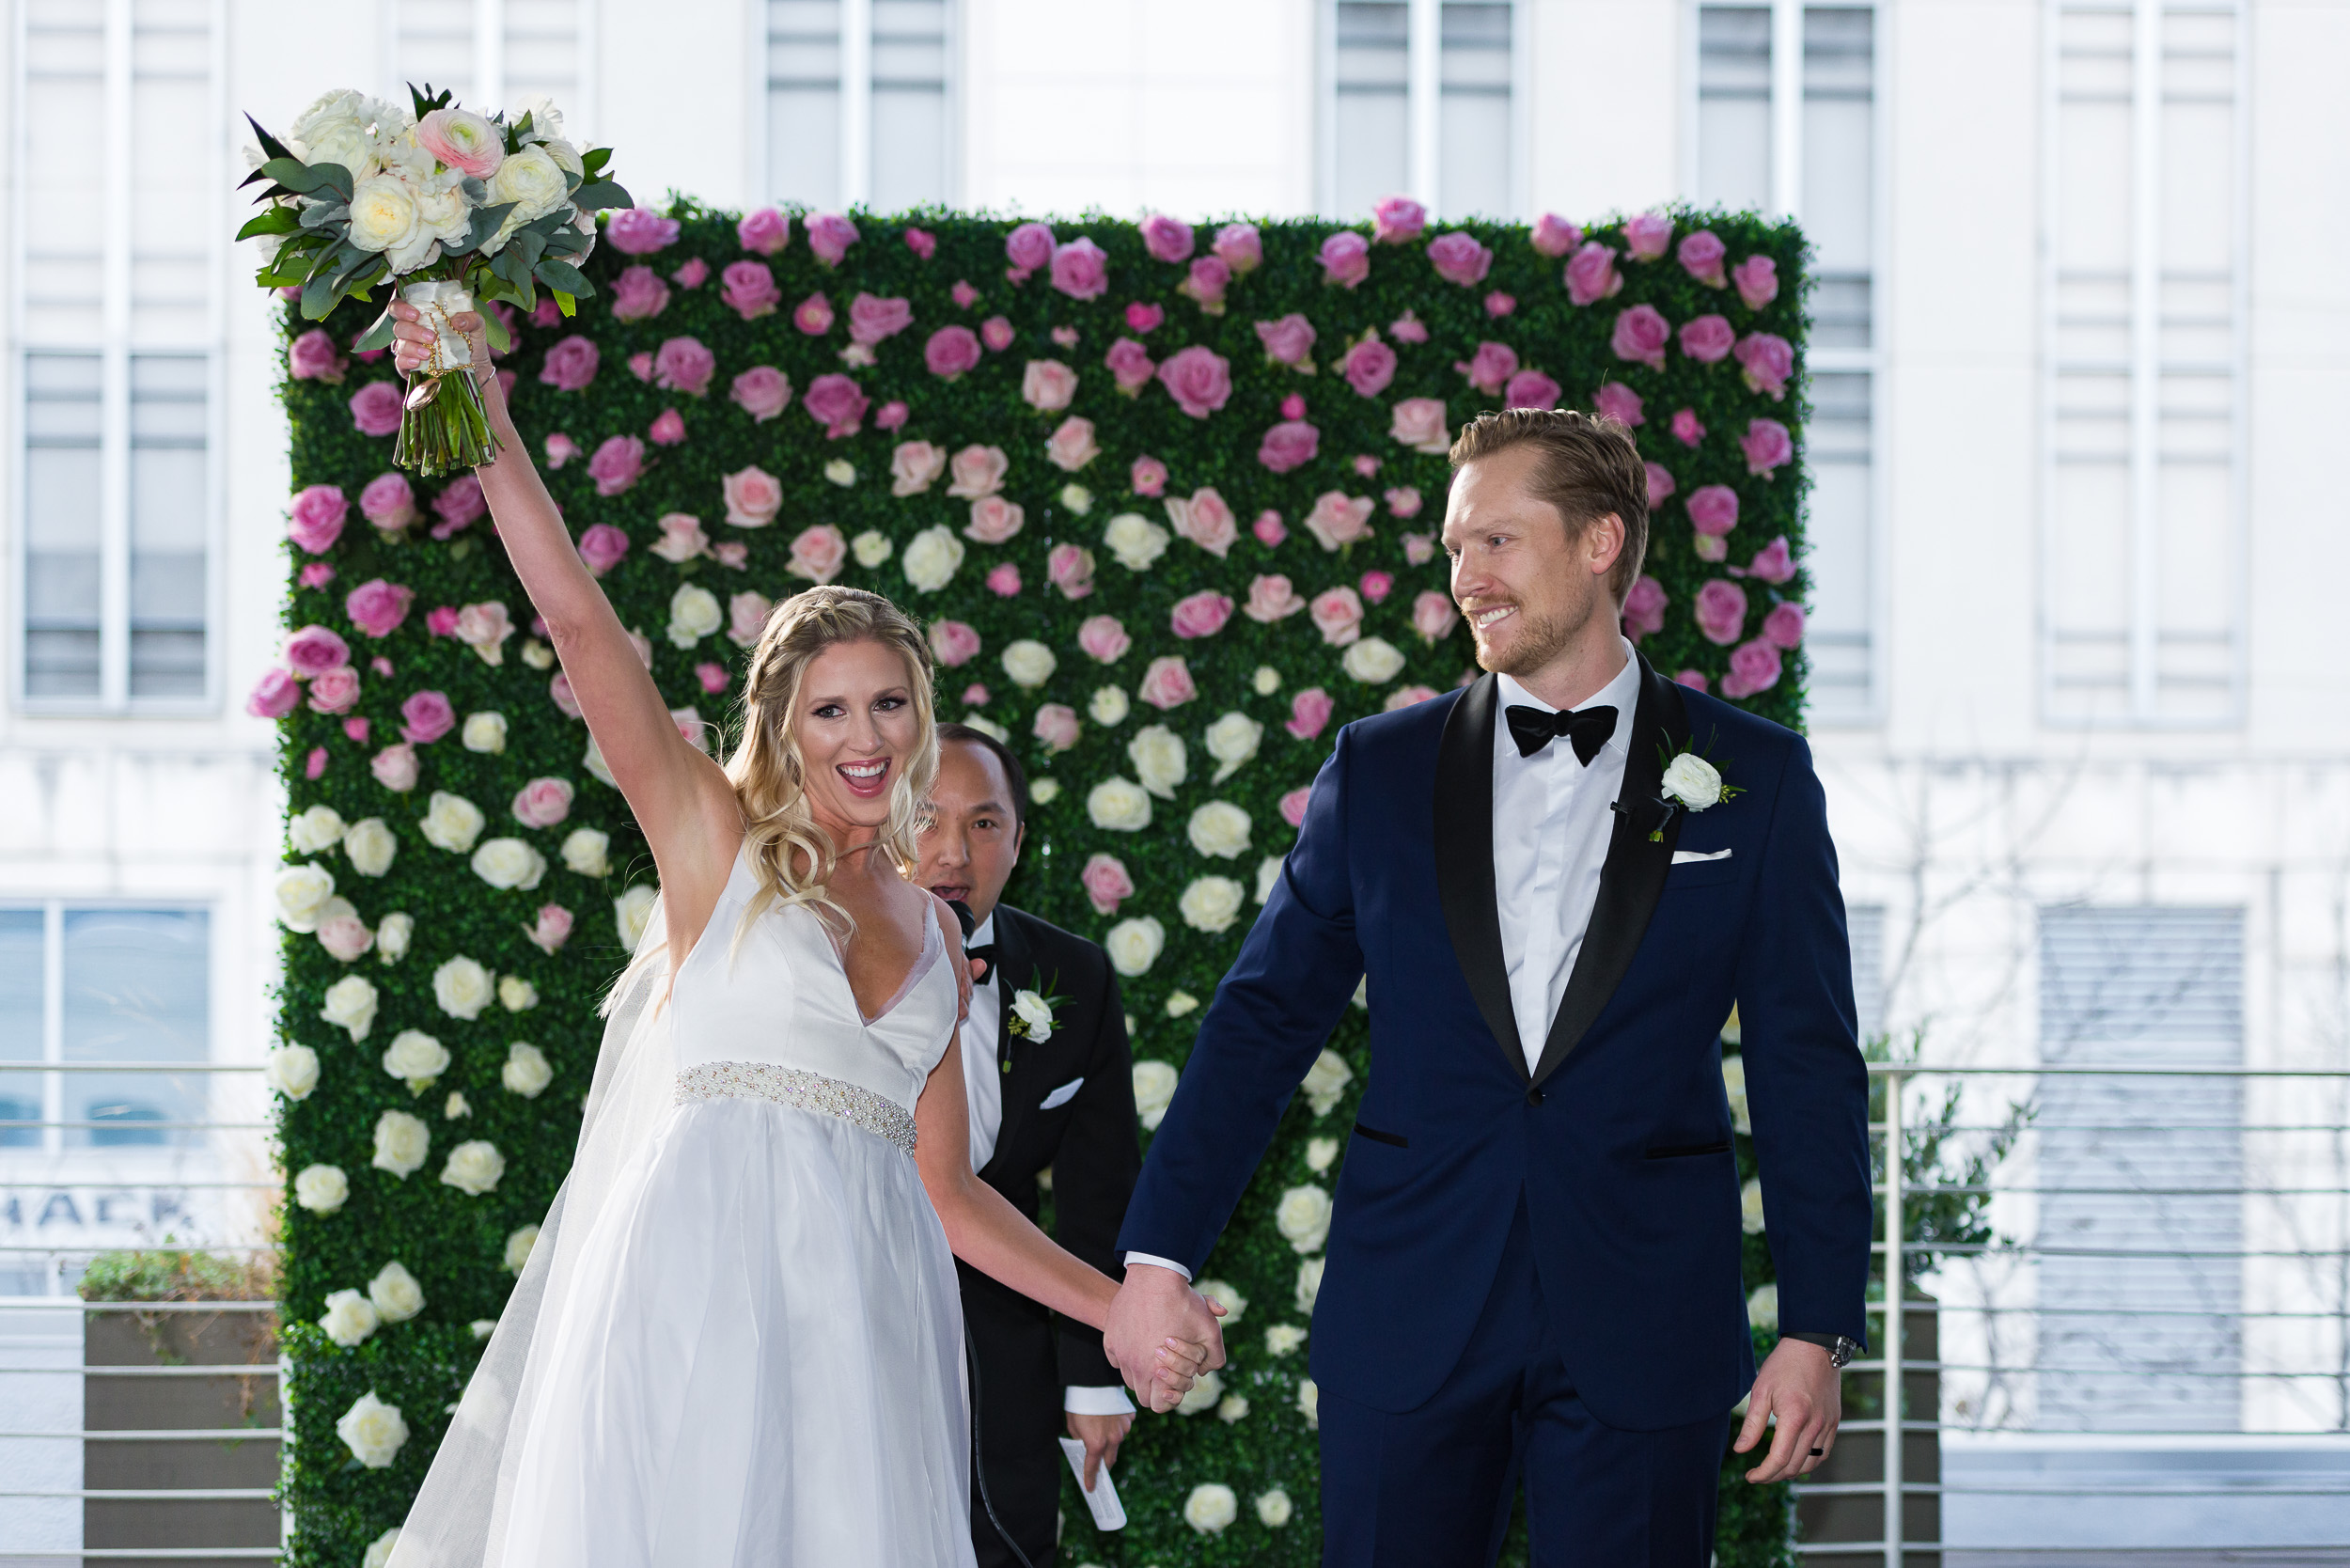 Austin-wedding-photographers-brazos-hall-downtown-married-excited-flower-wall-roses